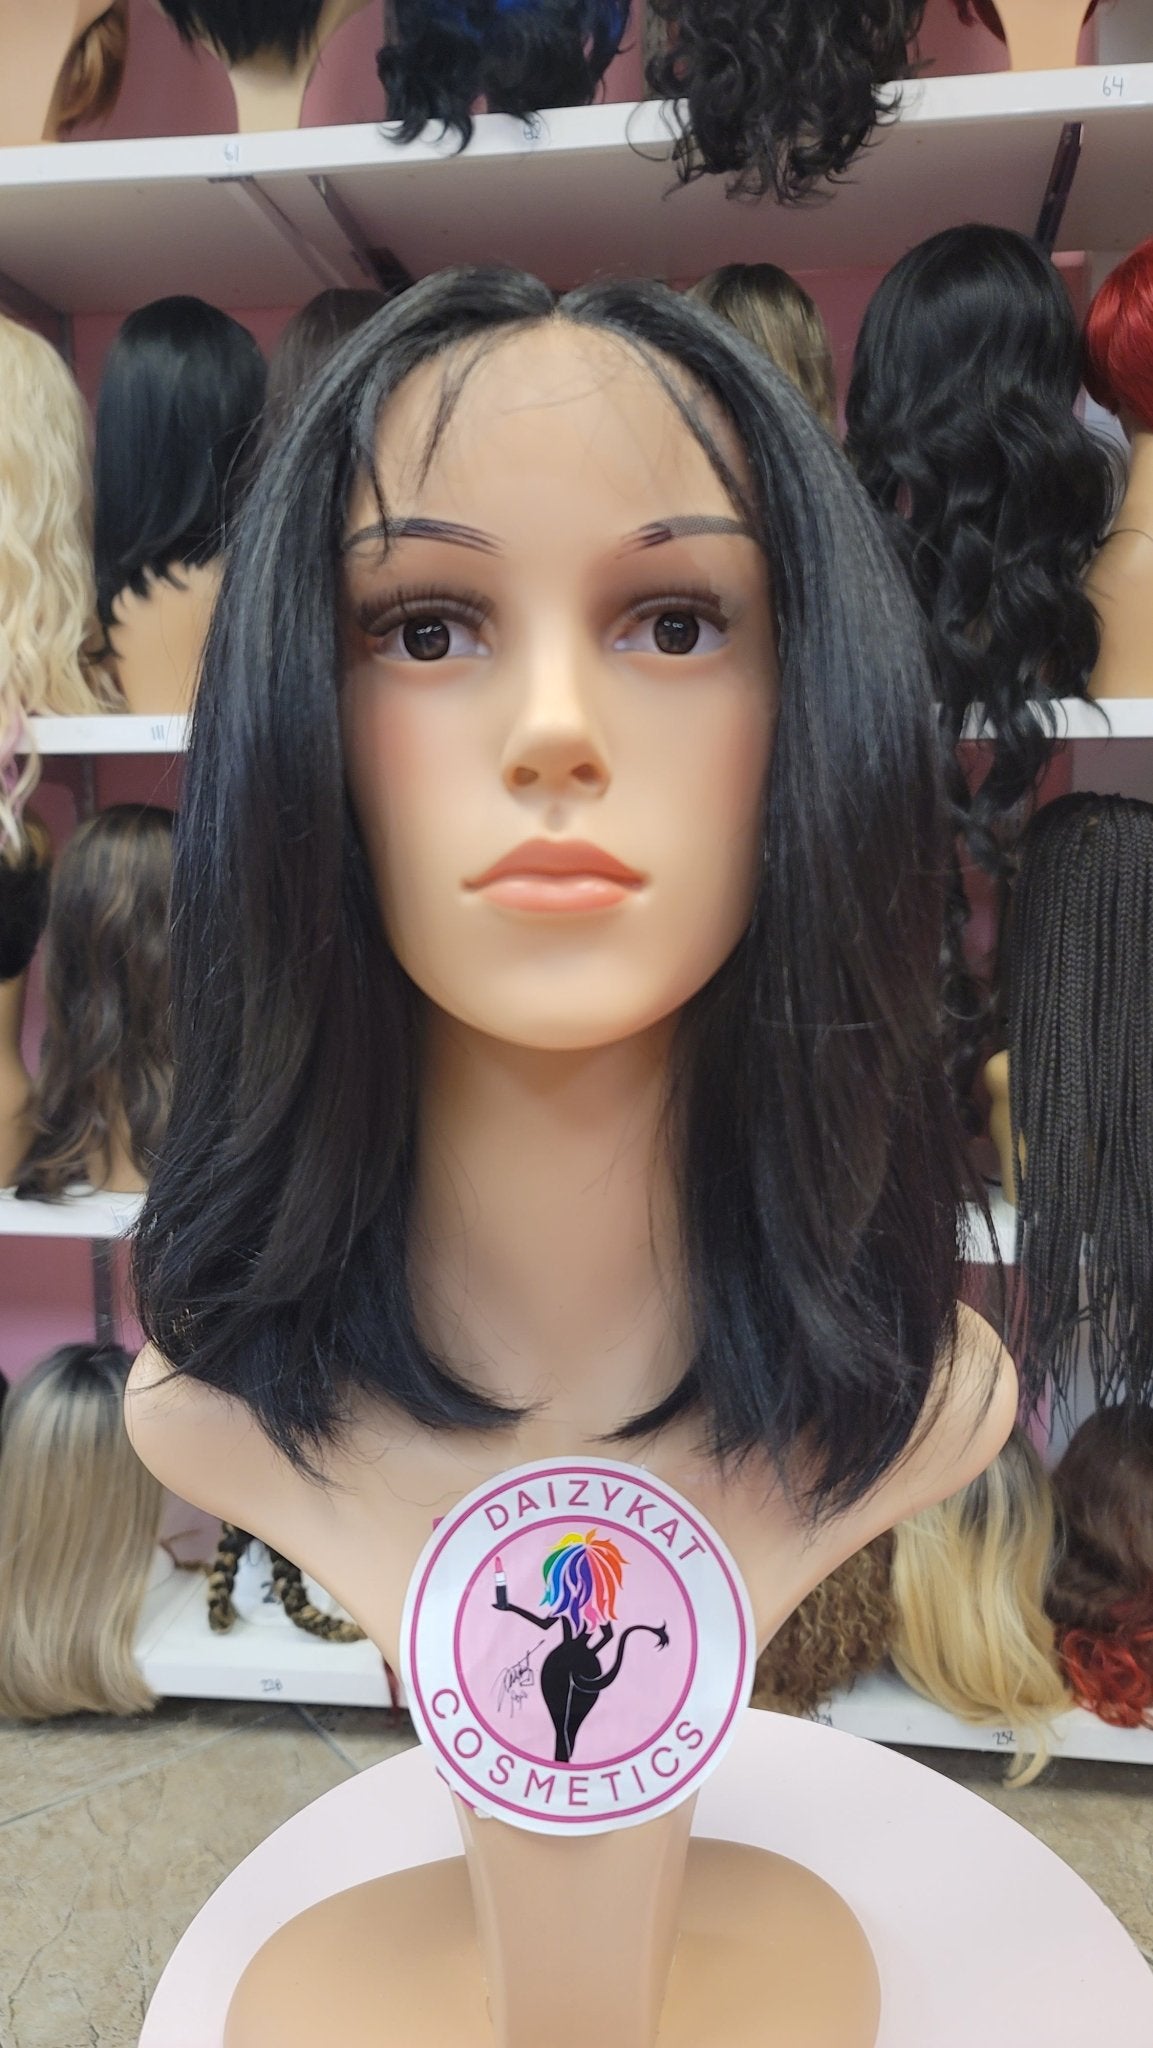 386 Faith - Middle Part Lace Front Wig - 1B - DaizyKat Cosmetics 386 Faith - Middle Part Lace Front Wig - 1B DaizyKat Cosmetics Wigs